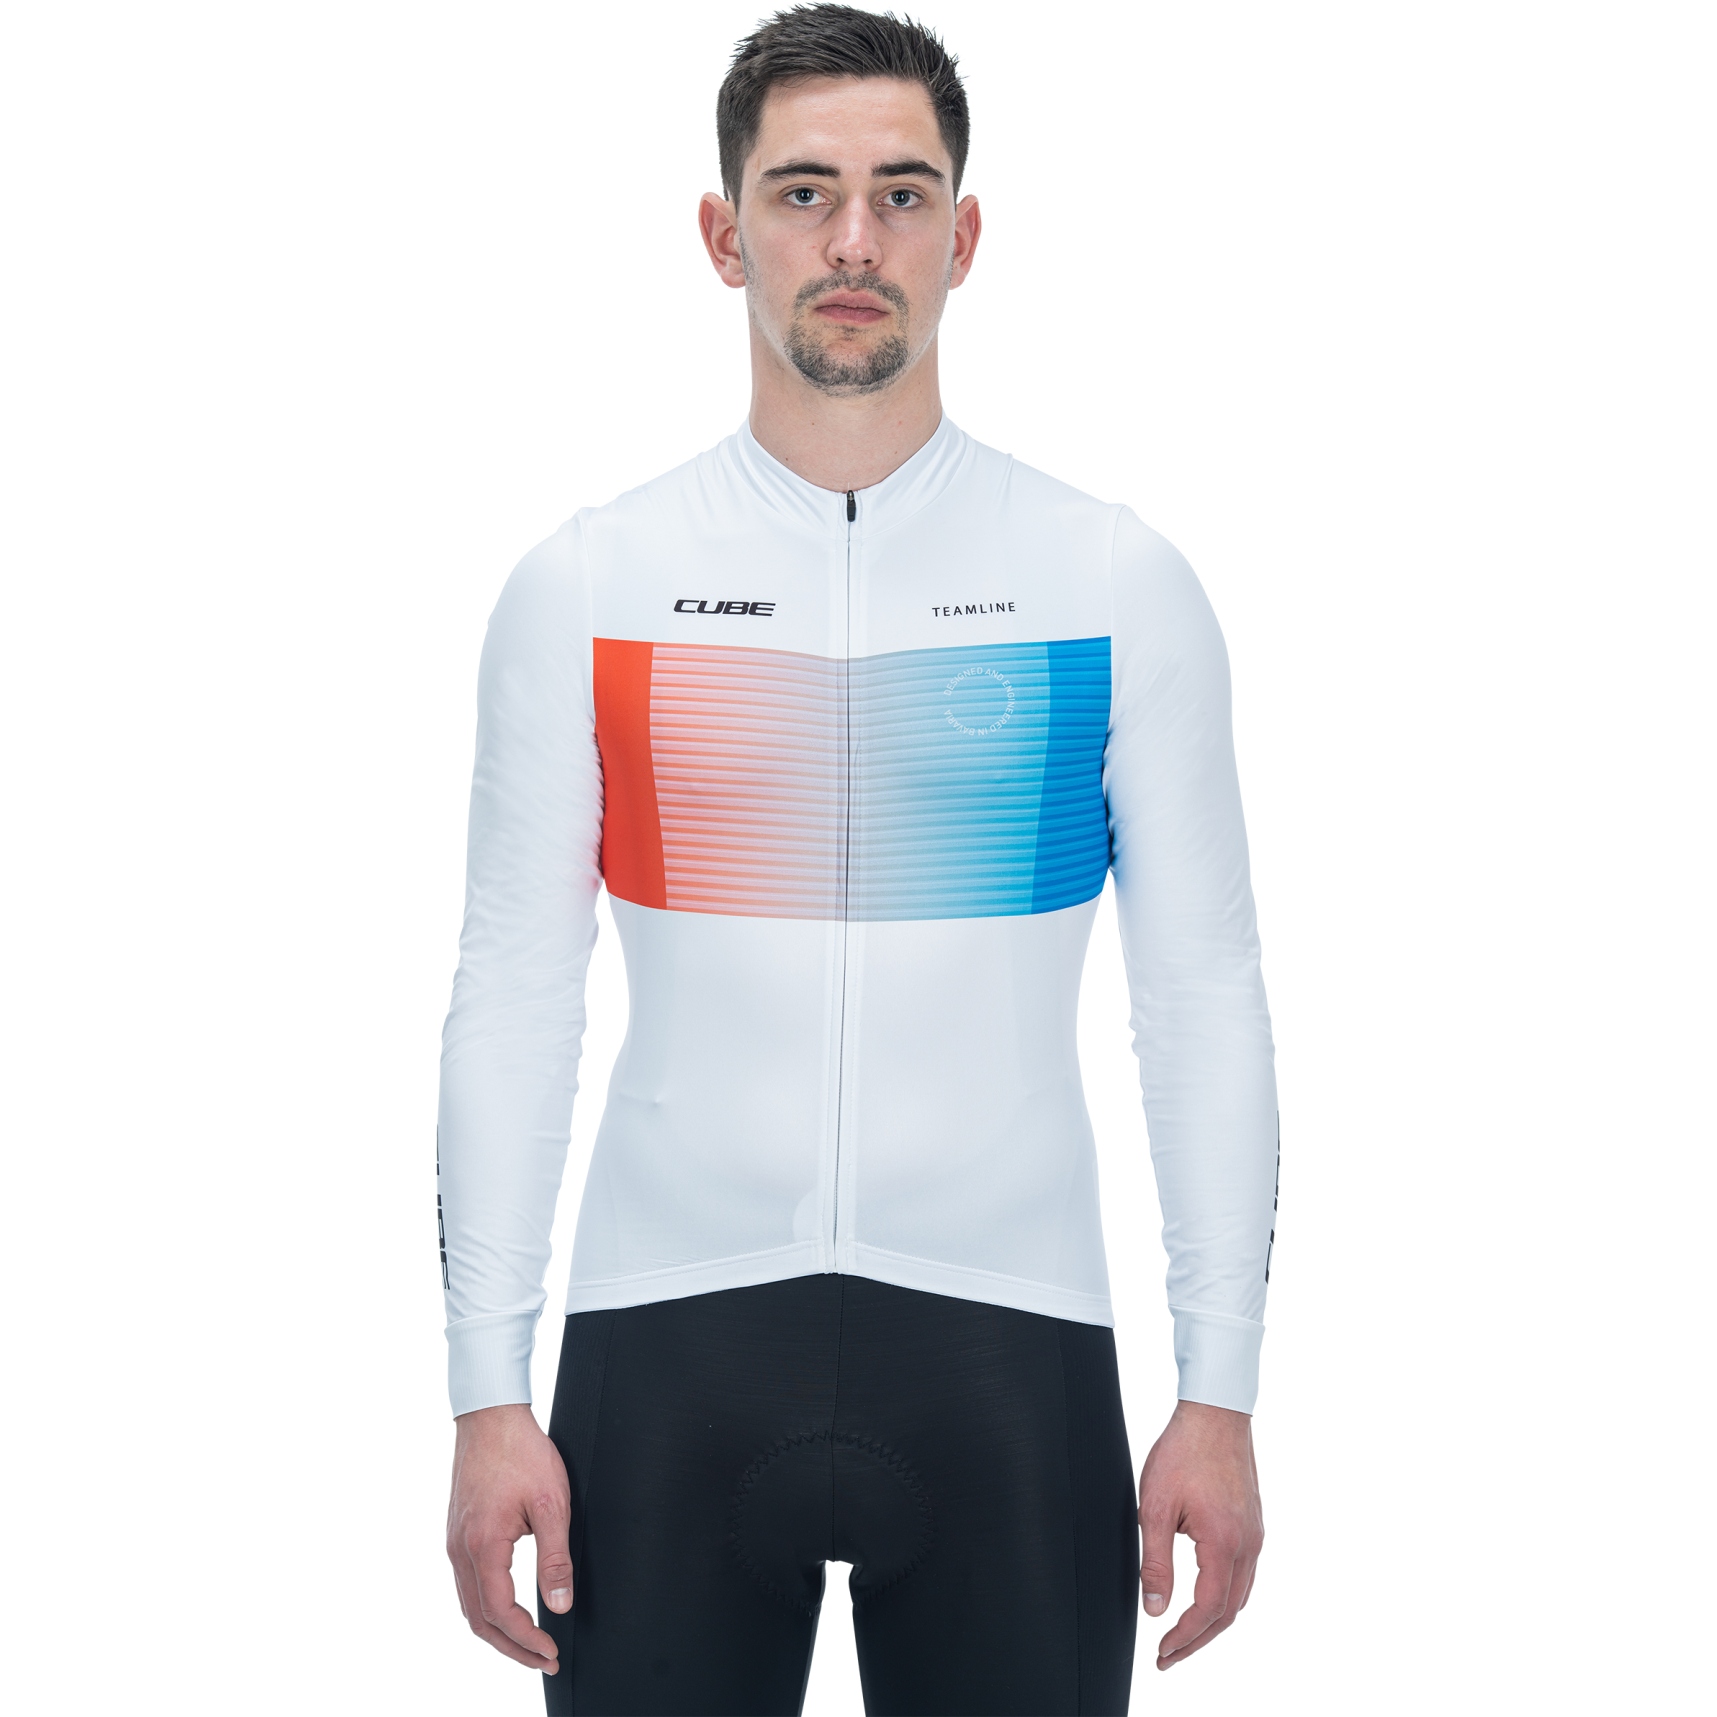 Image de CUBE Maillot Manches Longues Homme - TEAMLINE - white'n'blue'n'red